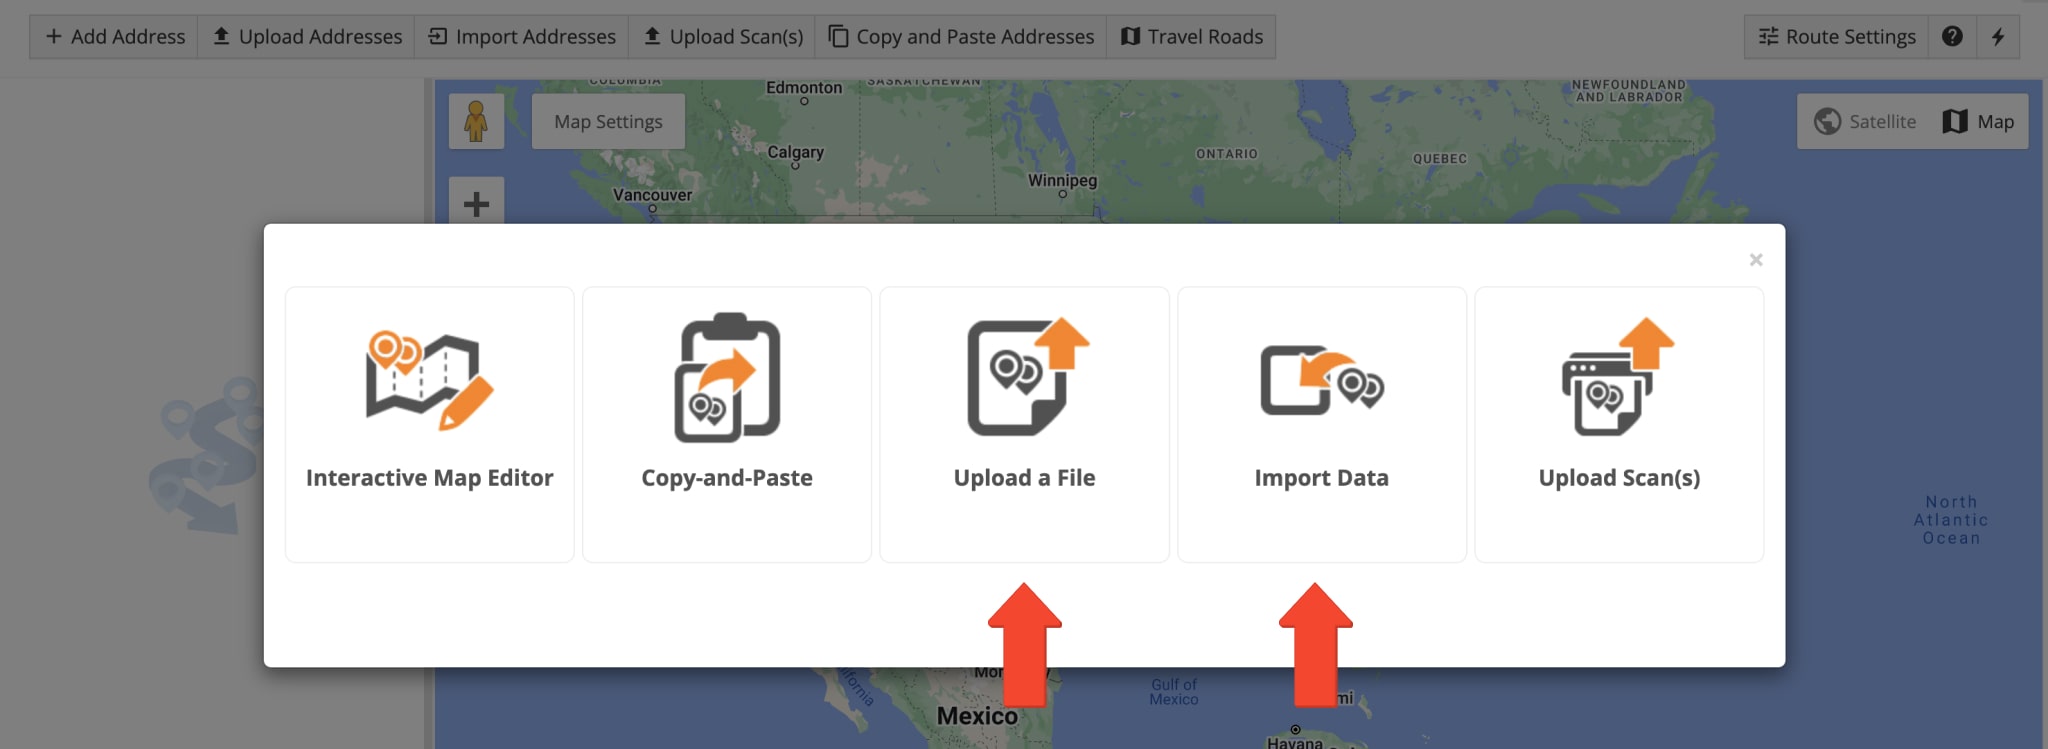 Select to upload a route spreadsheet or import a route spreadsheet from cloud storage.